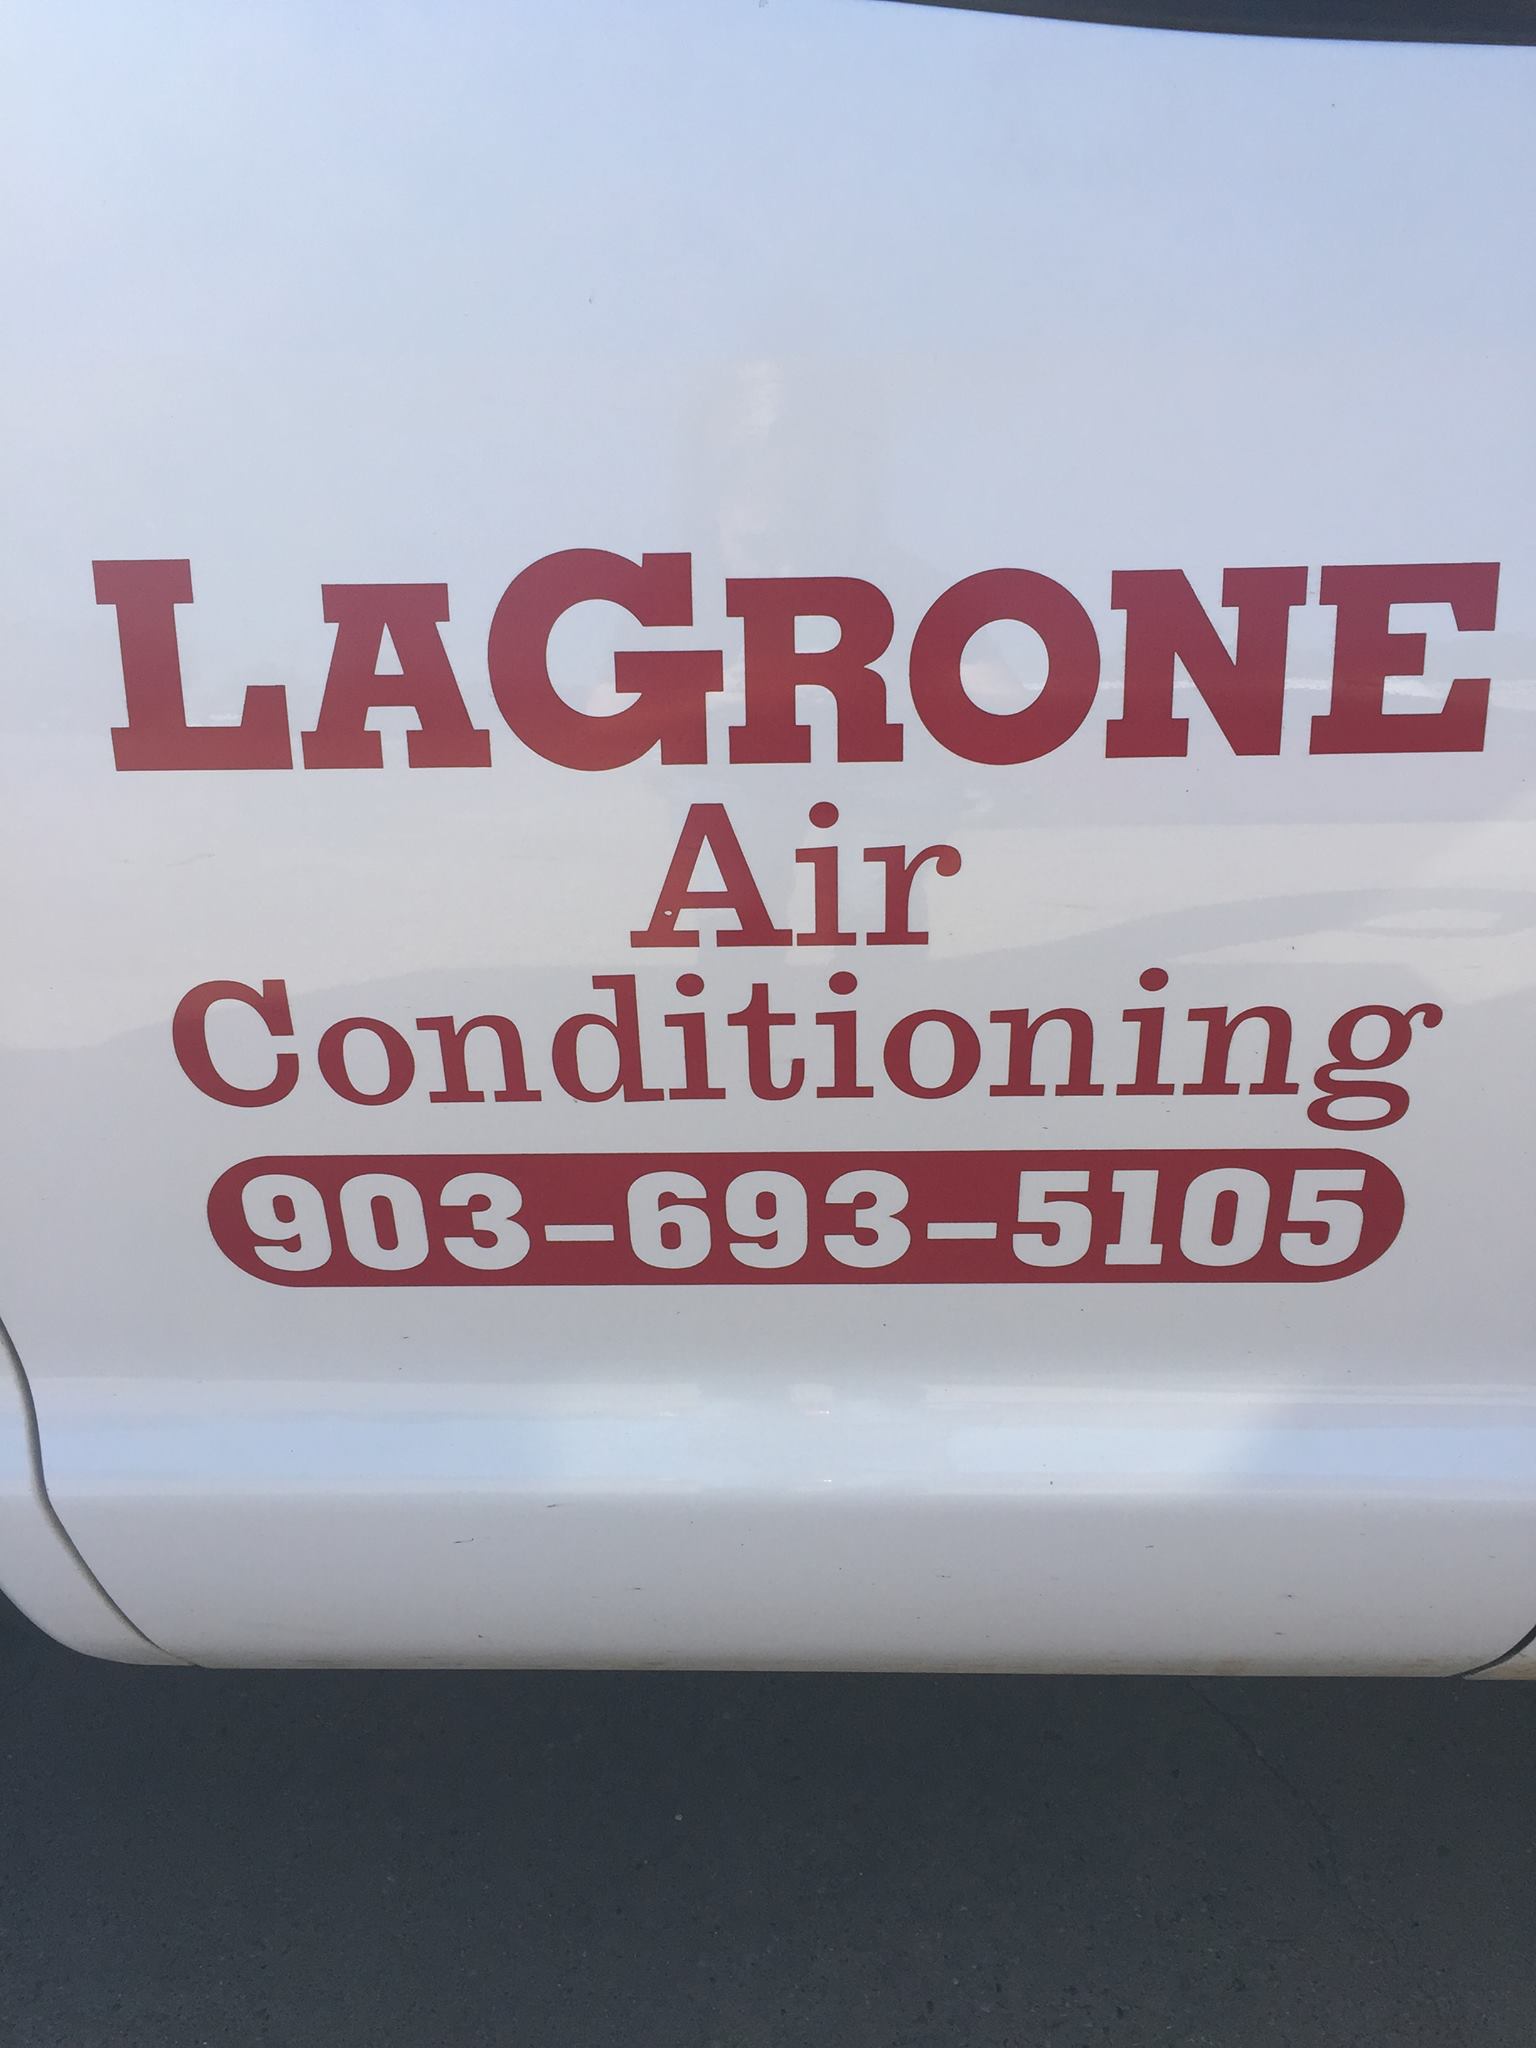 La Grone Air Conditioning & Heating 1033 Co Rd 3031, Carthage Texas 75633